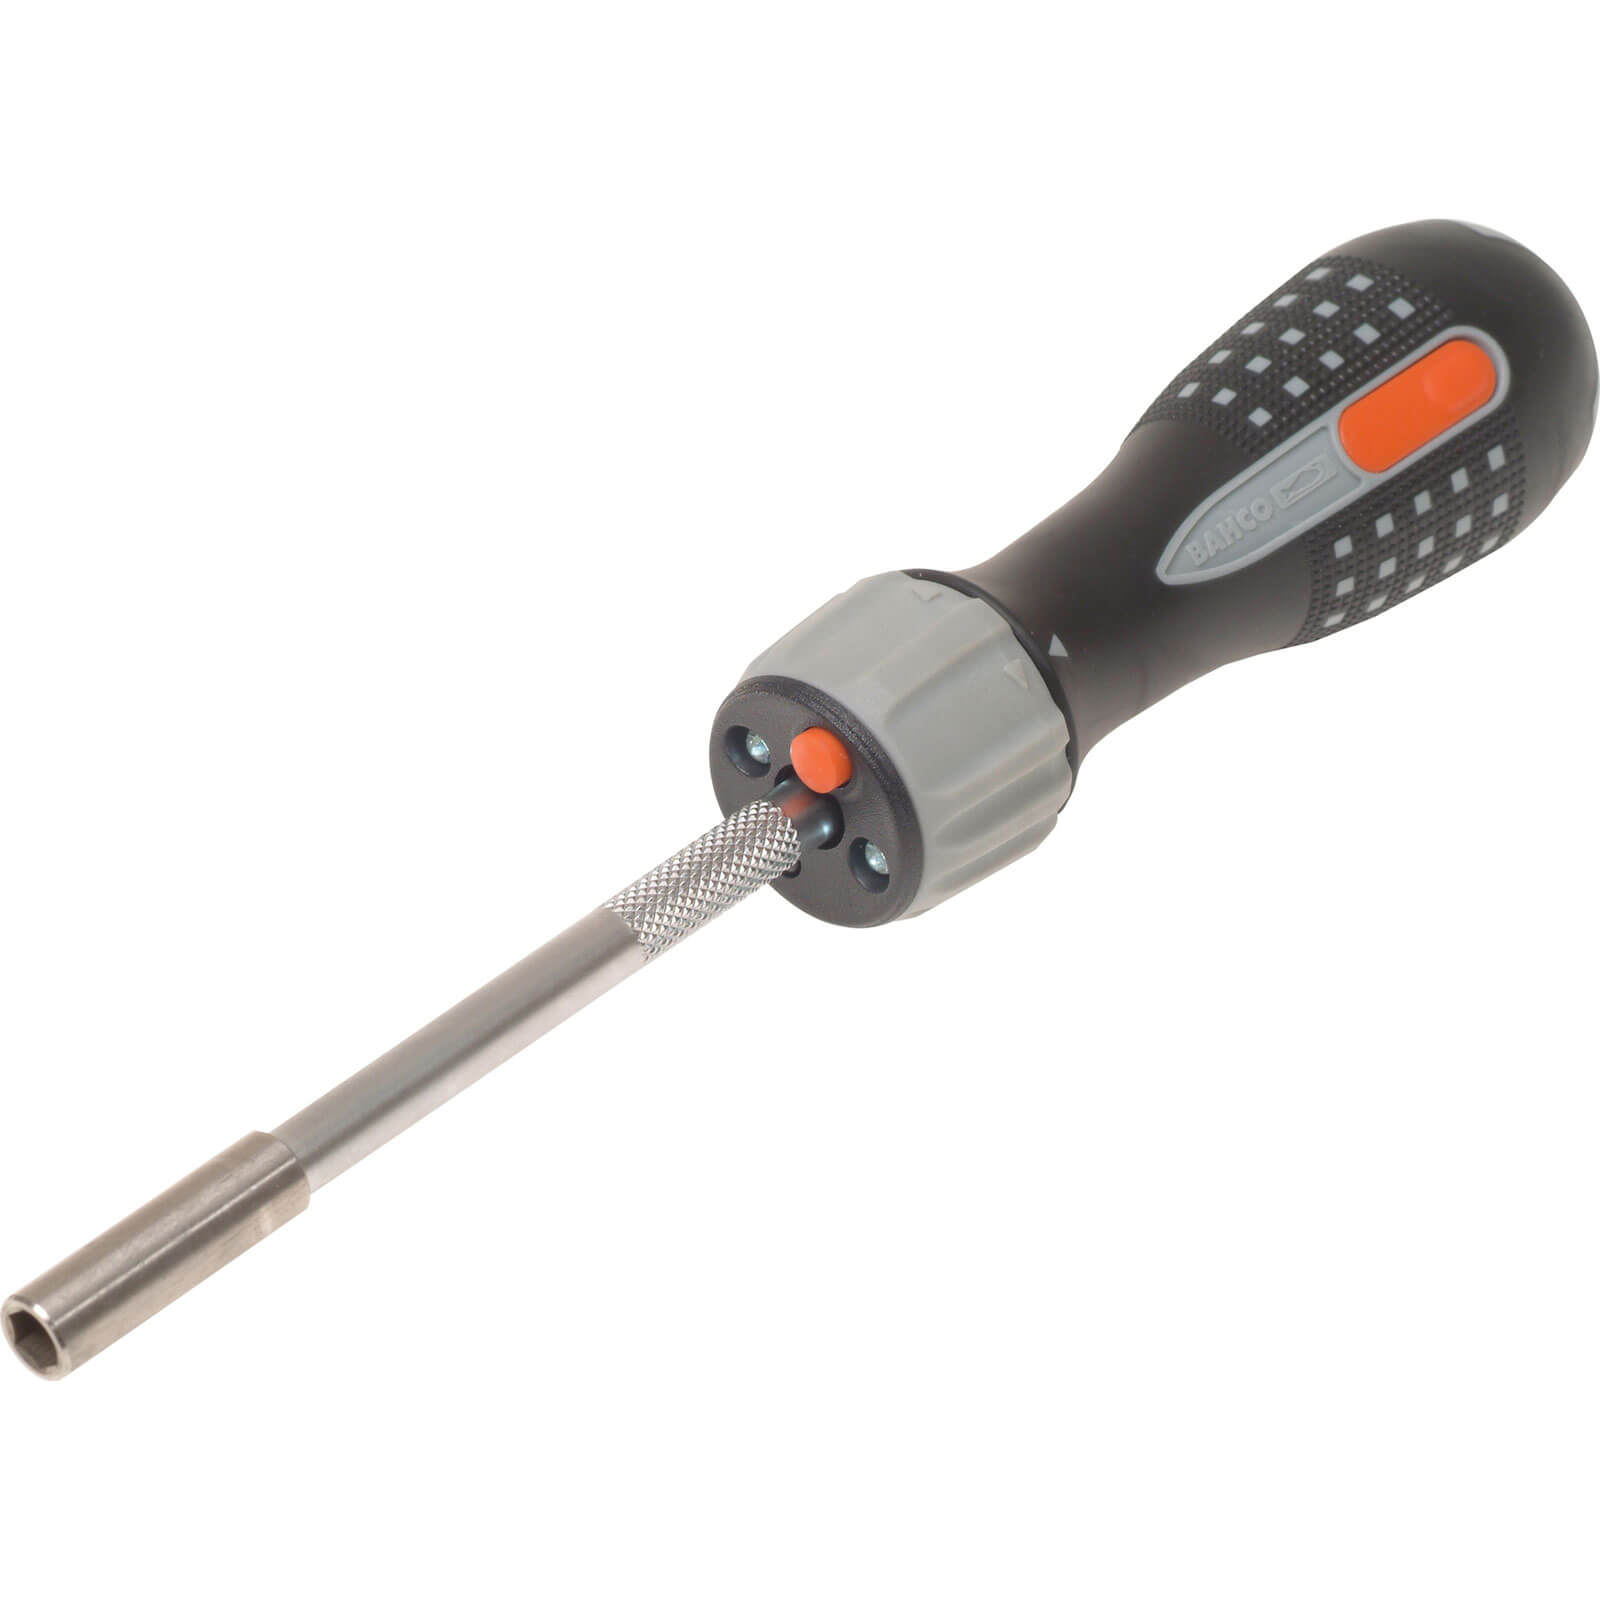 Image of Bahco 6 Piece LED Ratchet Screwdriver